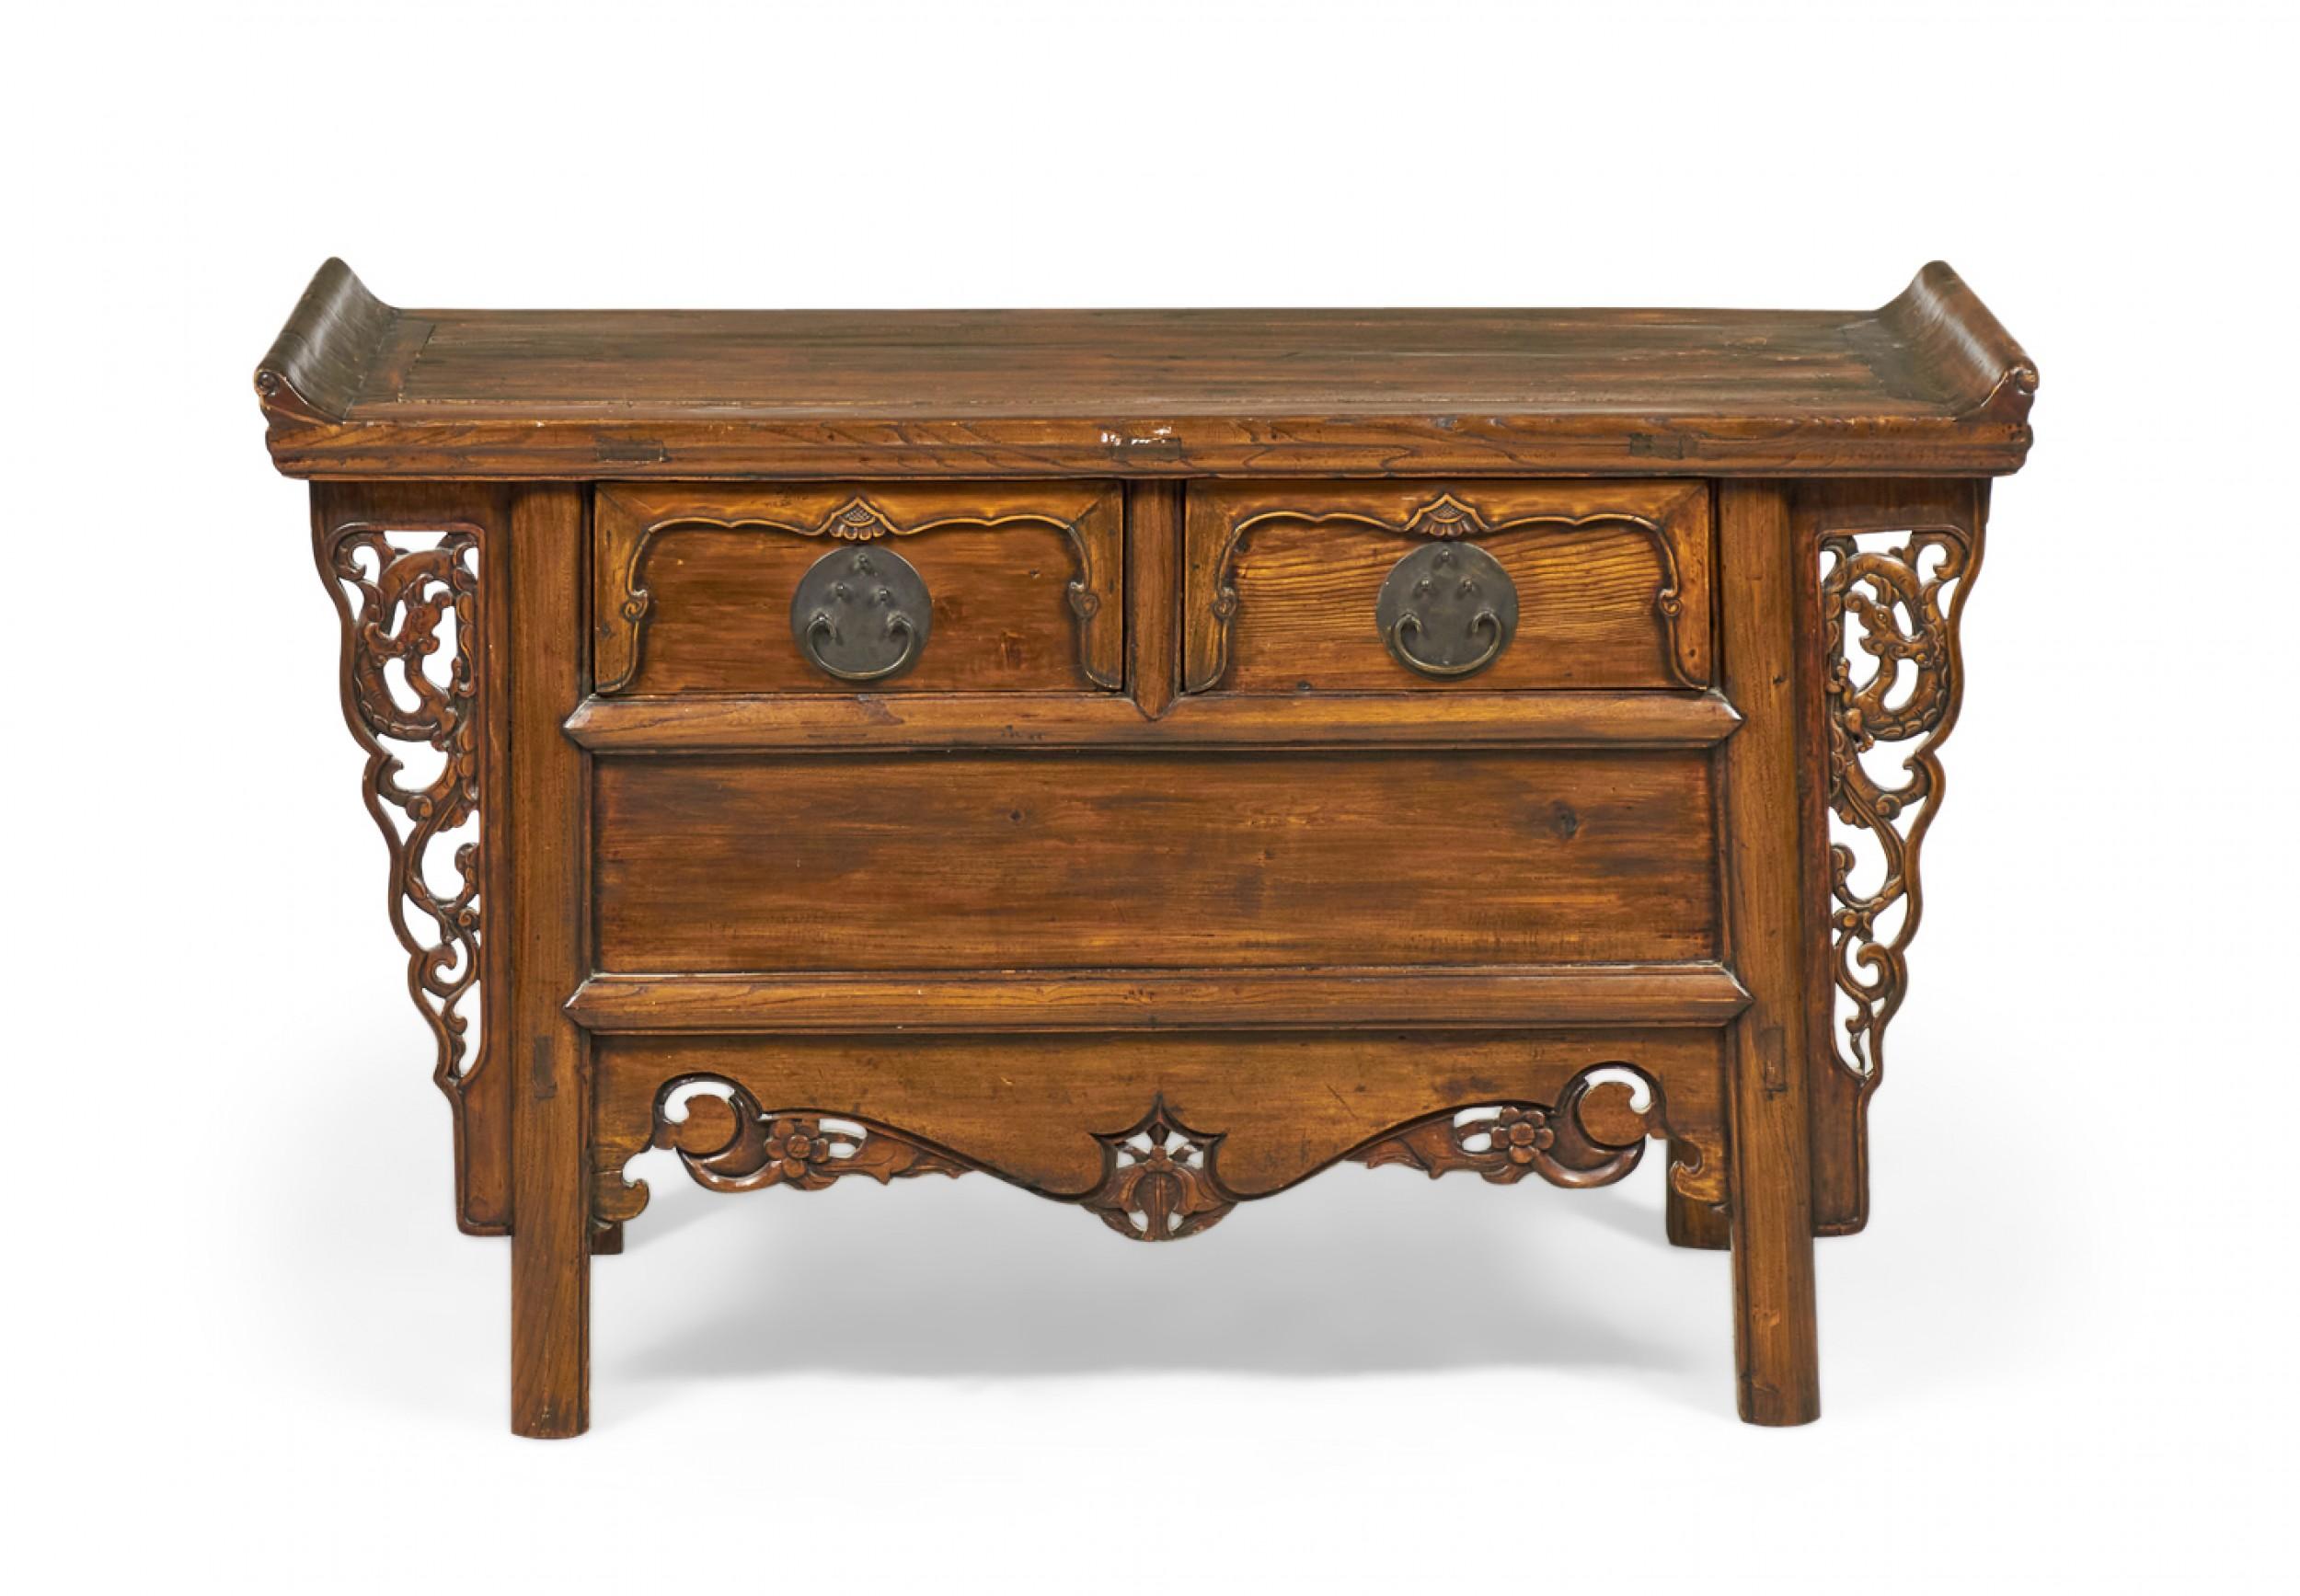 Antique Chinese (19th century) elm altar table with a rectangular top with two shallow side galleries above two carved front drawers with bronze drawer pulls, flanked on either side and below by elaborately carved reticulated side panels, all